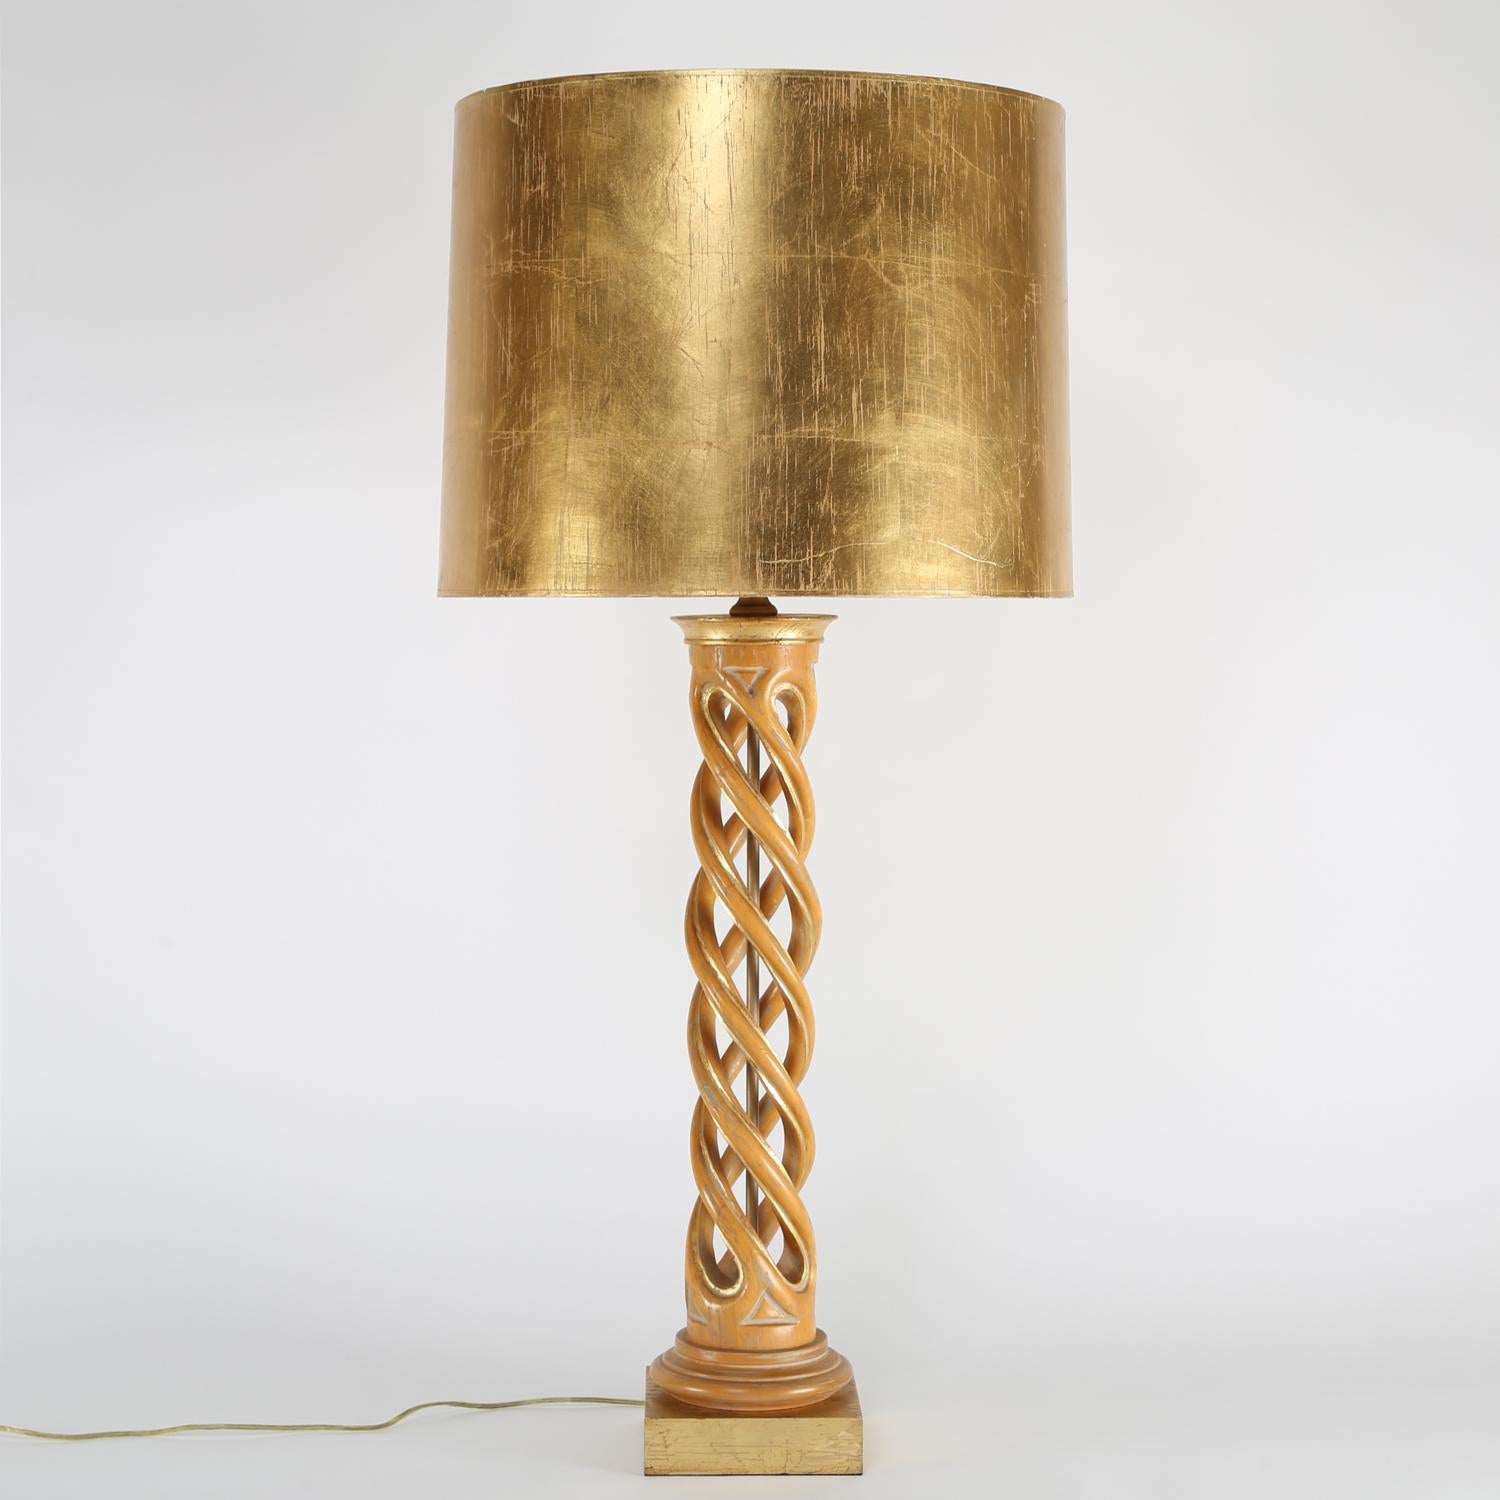 Pair of monumental carved helix table lamps in bleached mahogany with gilt bases and shades by Frederick Cooper, American, 1950's. These sculptural table lamps are beautifully made.

Measures: Shade diameter: 20 inches
Shade height 15 inches.